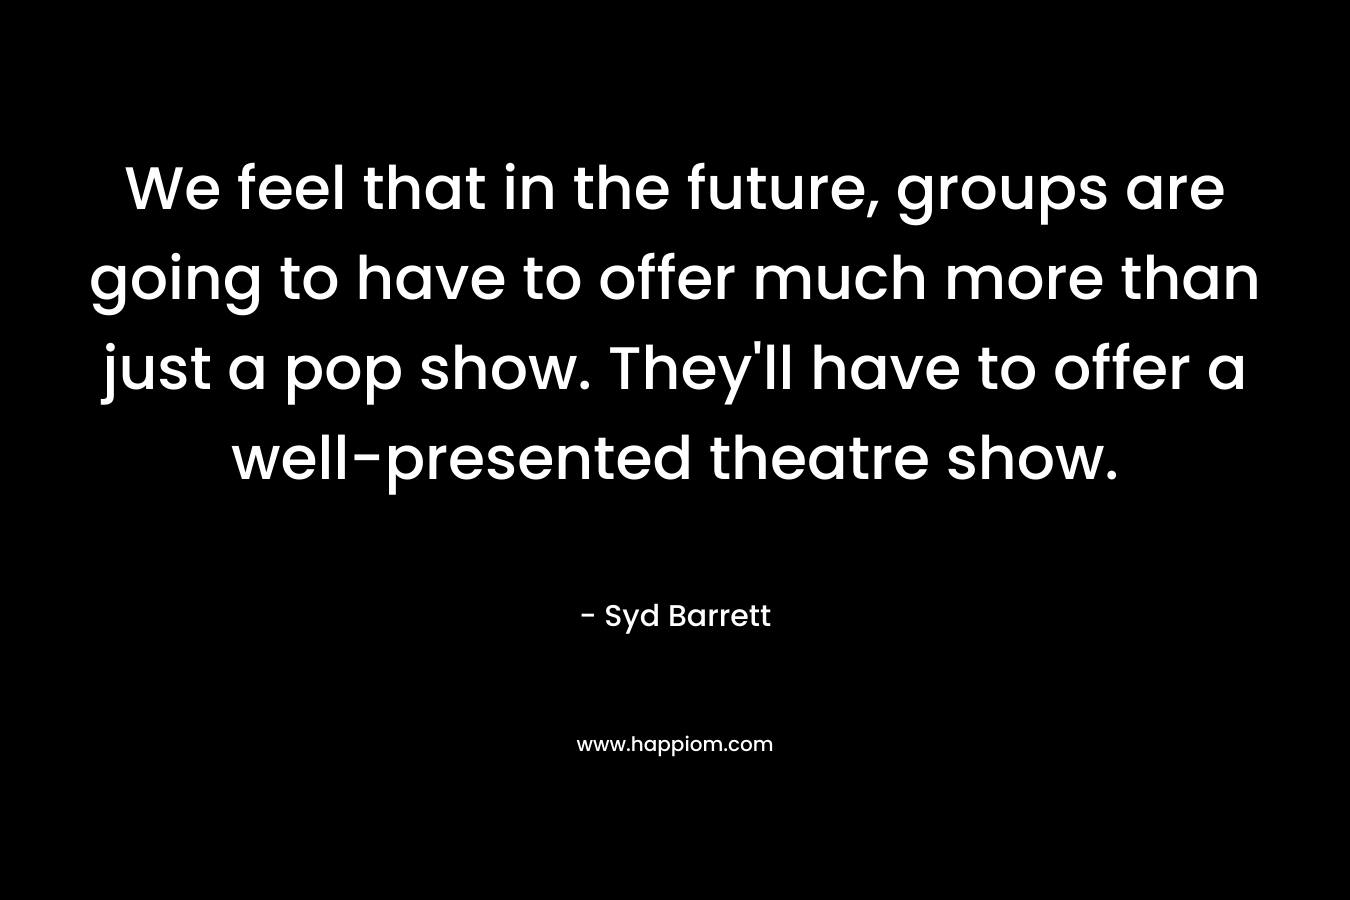 We feel that in the future, groups are going to have to offer much more than just a pop show. They'll have to offer a well-presented theatre show.